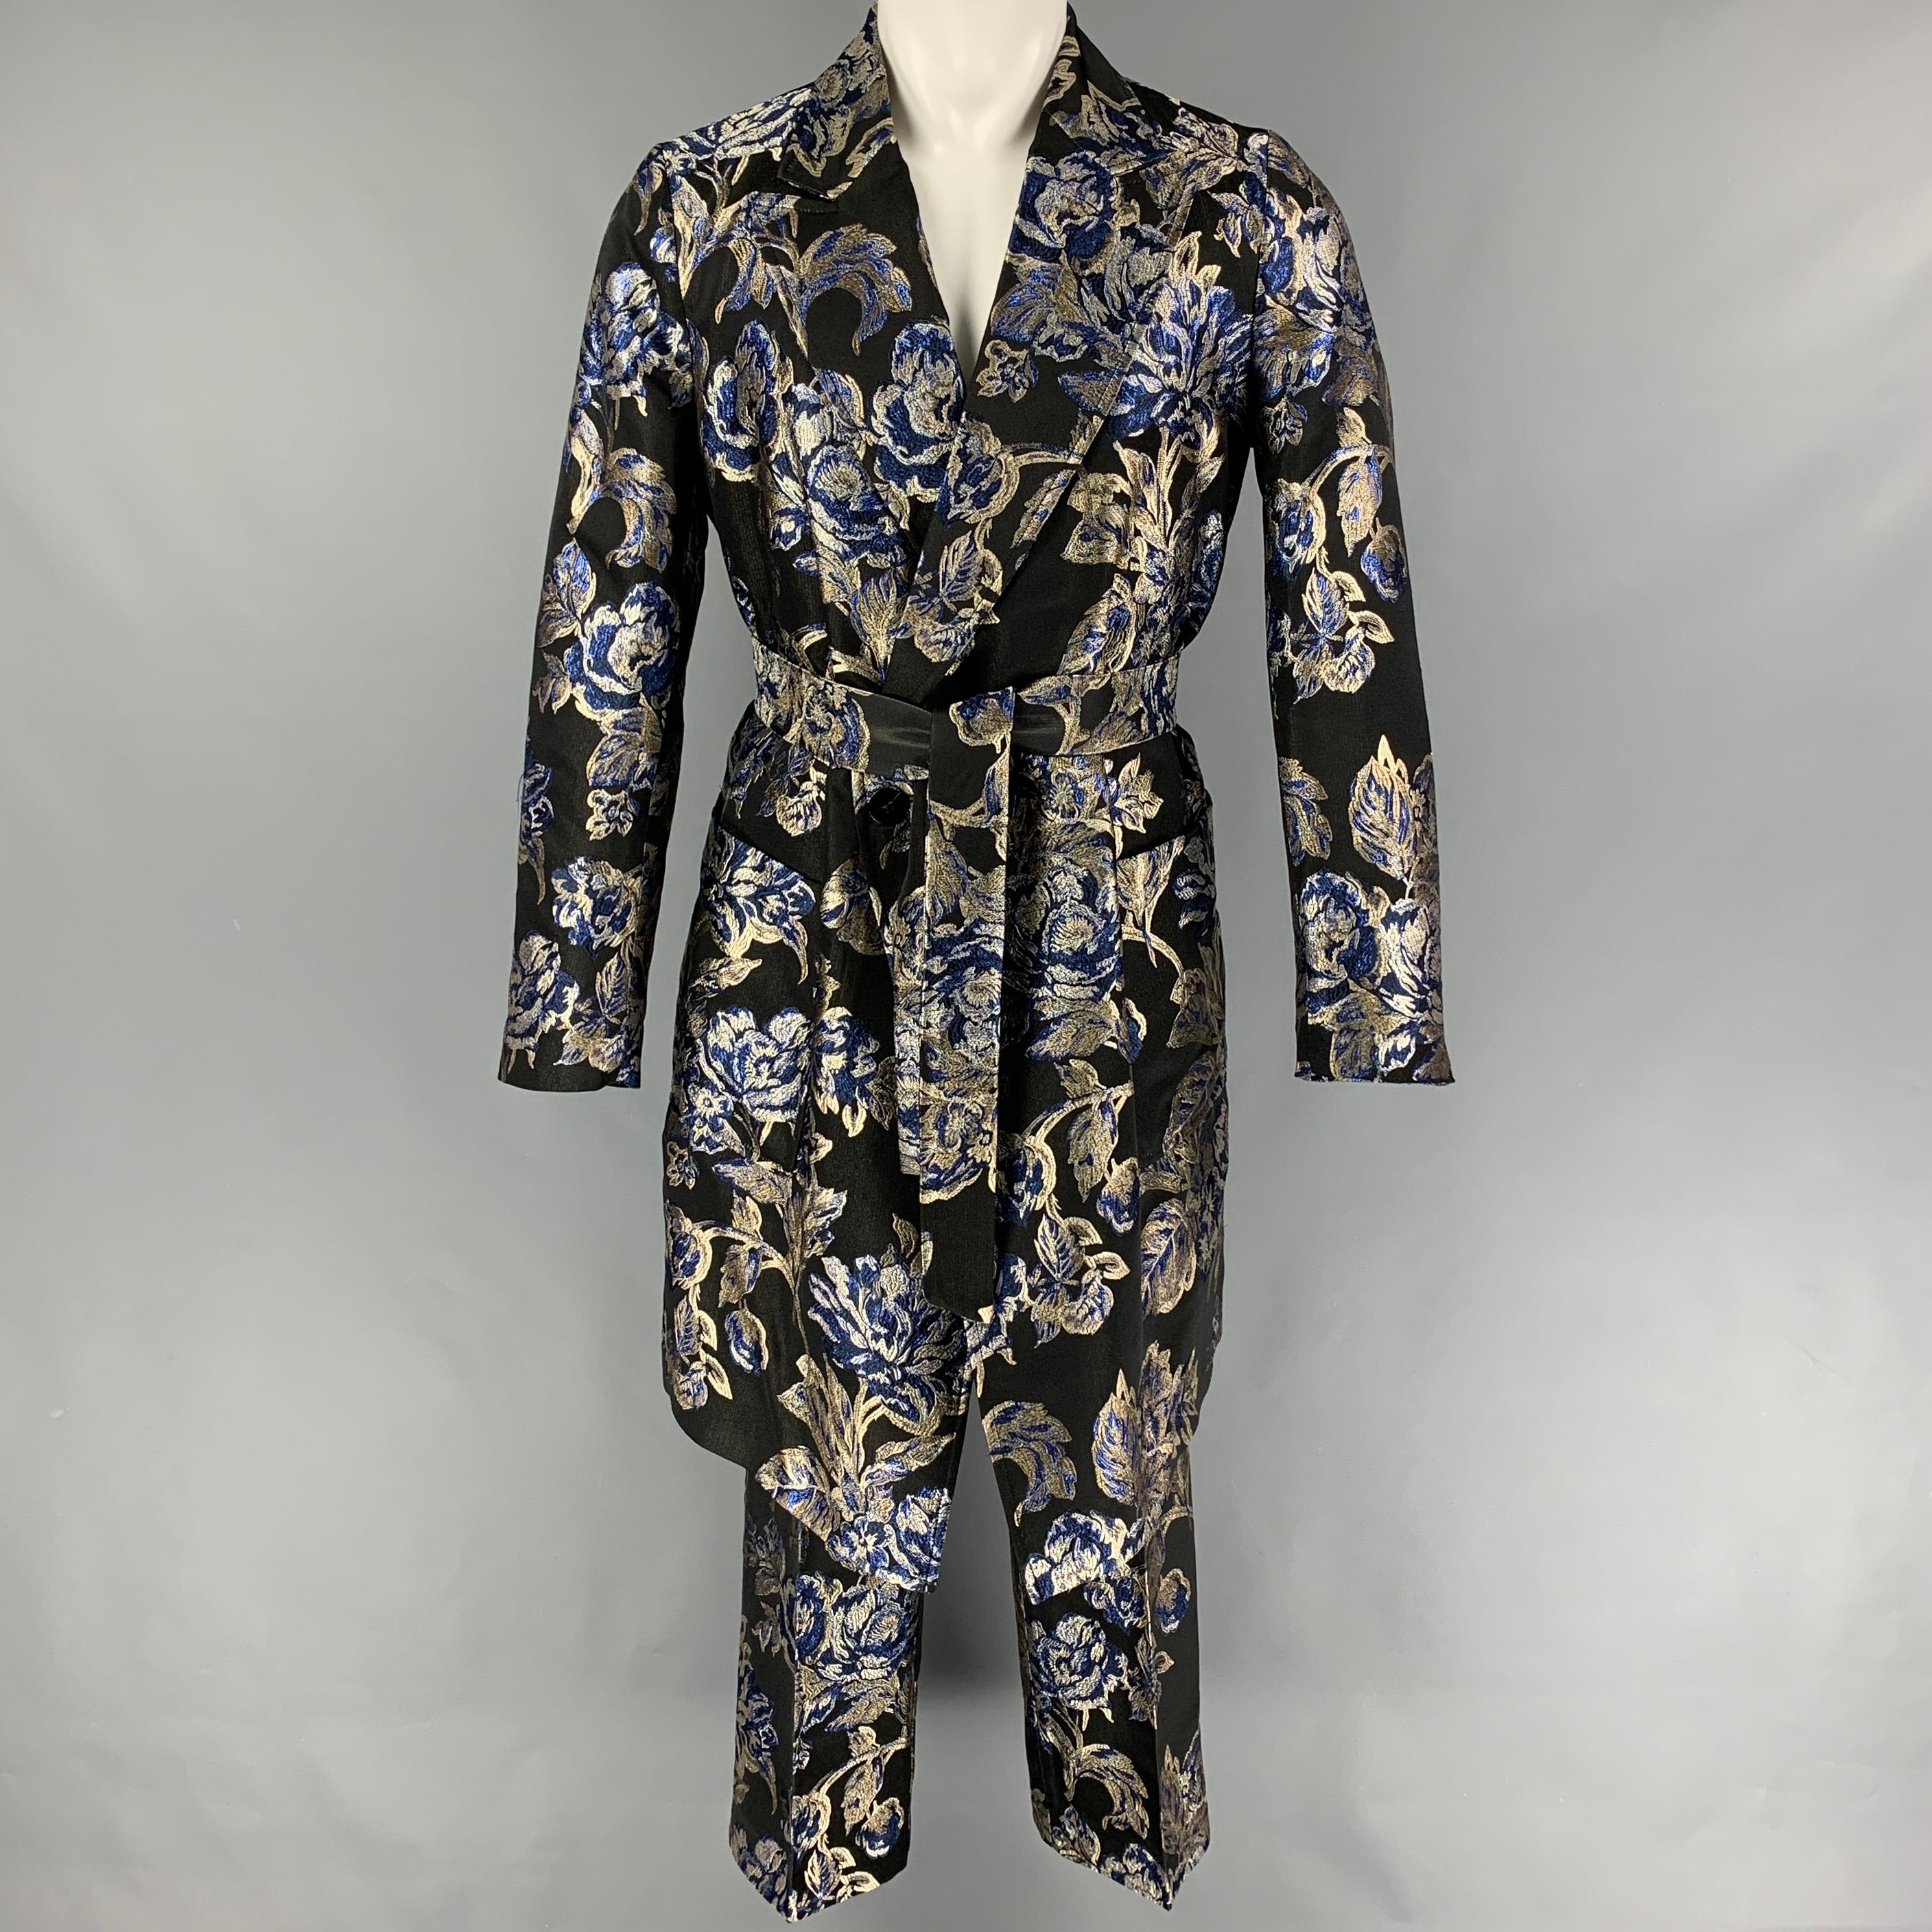 CHRISTIAN PELLIZZARI coat suit comes in black & blue jacquard acetate blend and includes a double breasted, belted loose fit coat with a peak lapel and matching flat front trousers. Made in Italy.

Very Good Pre-Owned Condition.
Marked: